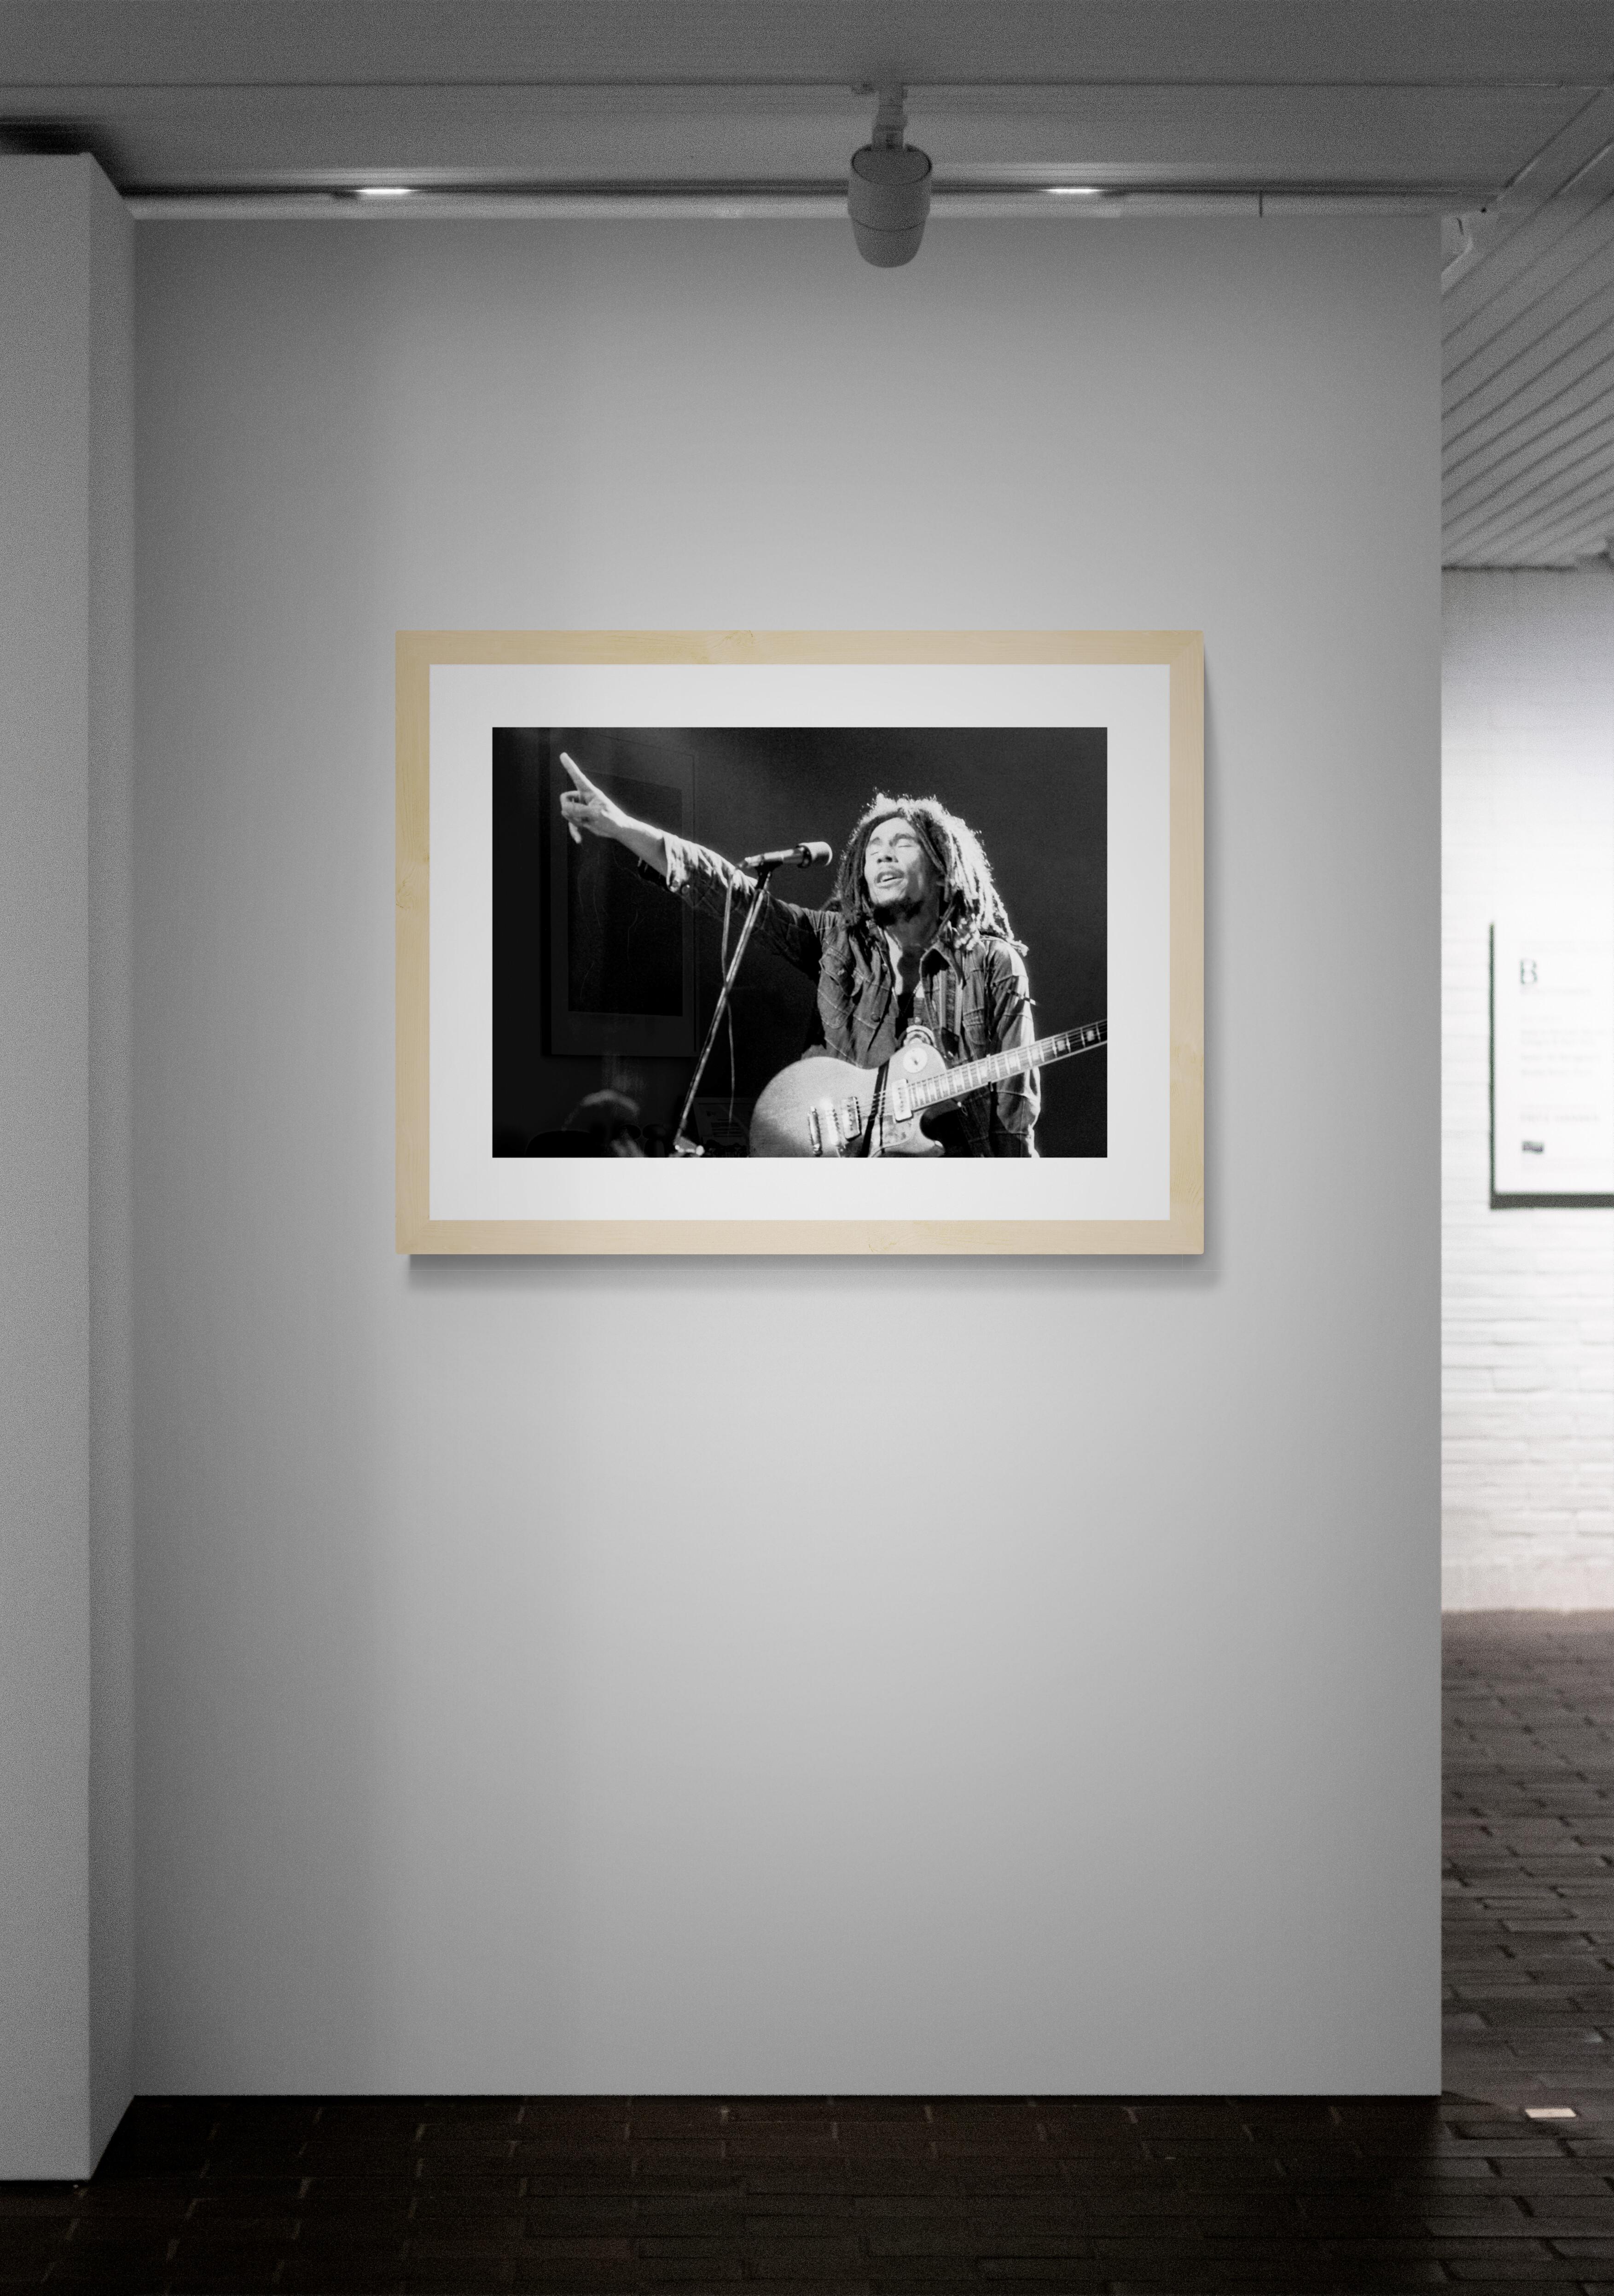 Title: Bob Marley #7
Artist: Richard E. Aaron
Estate Edition: Hand numbered with estate chop mark in the margin, signature stamp on verso, archival pigment print on Hahnemühle Photo Rag Pearl, 100% cotton paper fine art paper. Authorized worldwide